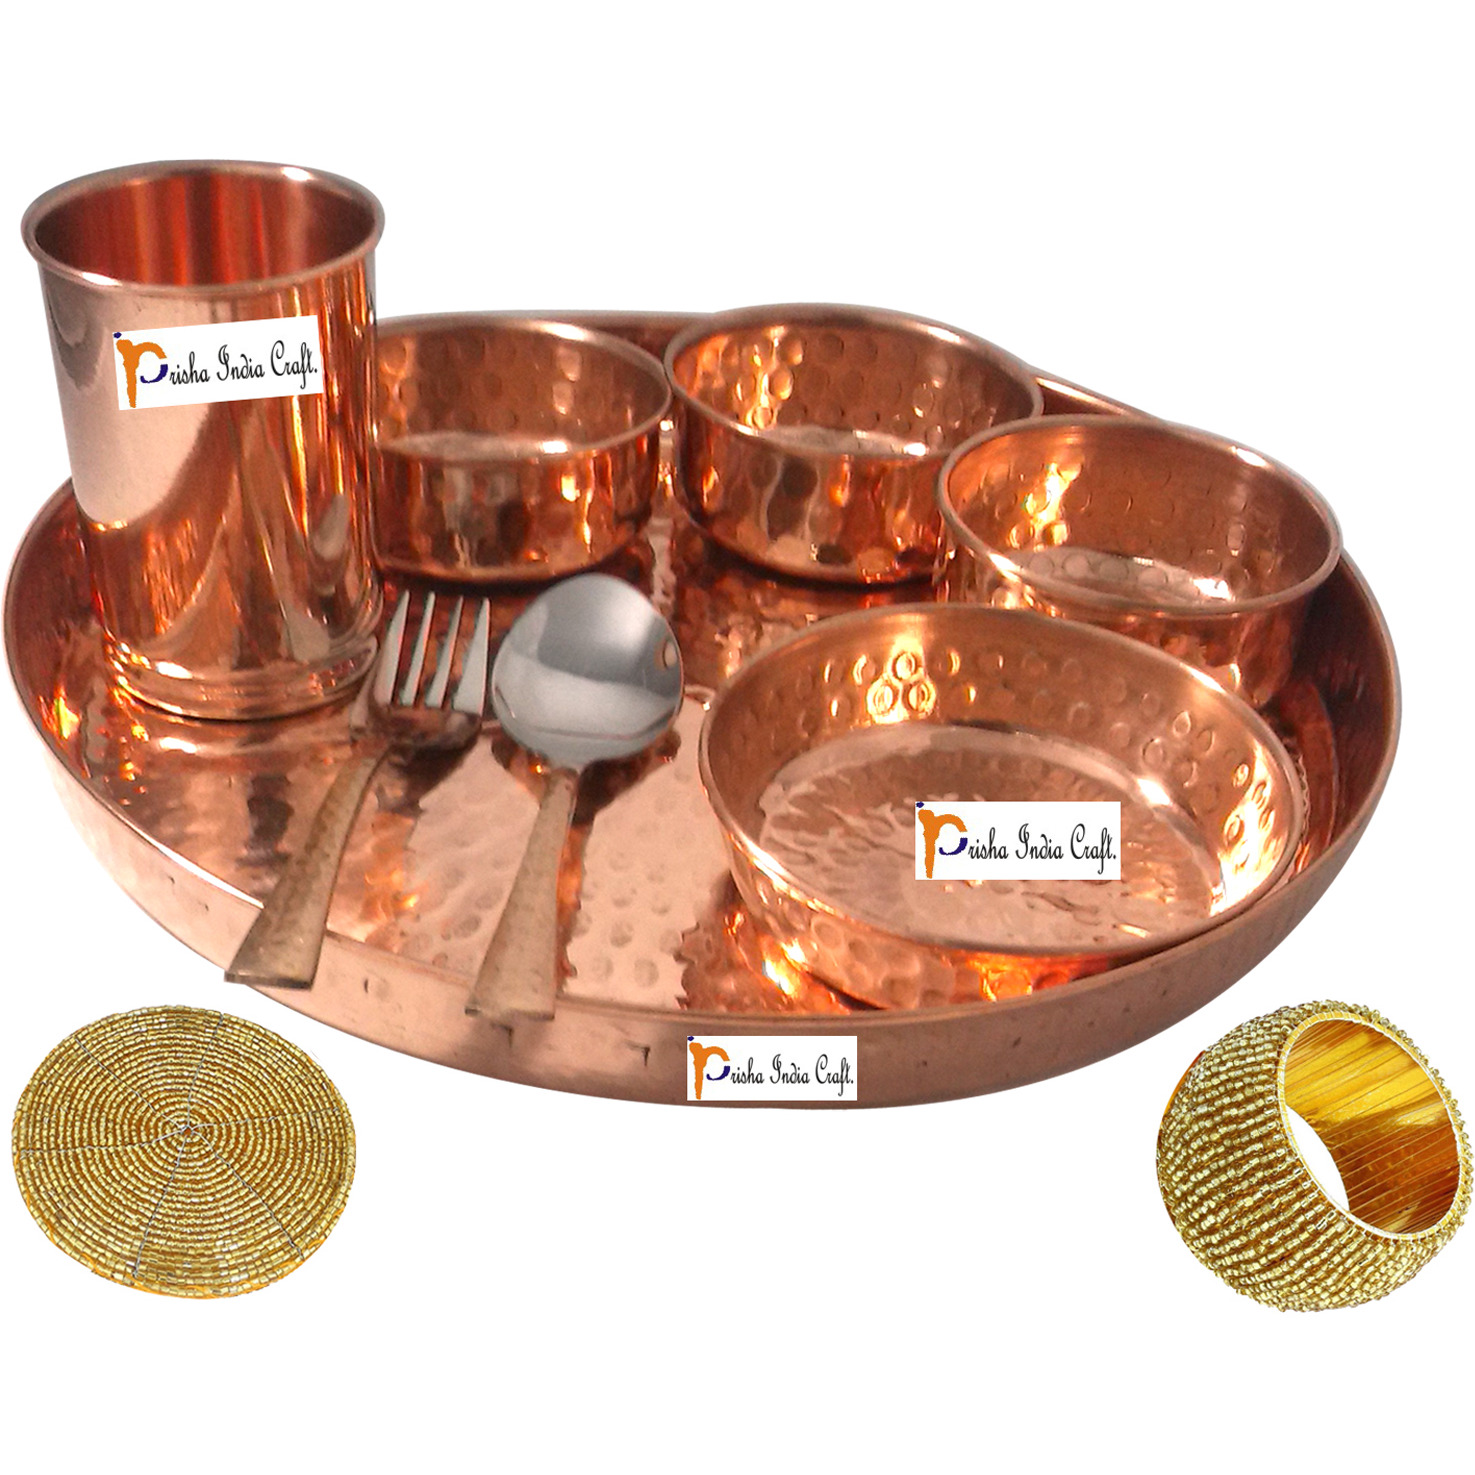 Set of 4 Prisha India Craft B. Handmade Indian Dinnerware Pure Copper Thali Set Dia 12  Traditional Dinner Set of Plate, Bowl, Spoons, Glass with Napkin ring and Coaster - Christmas Gift